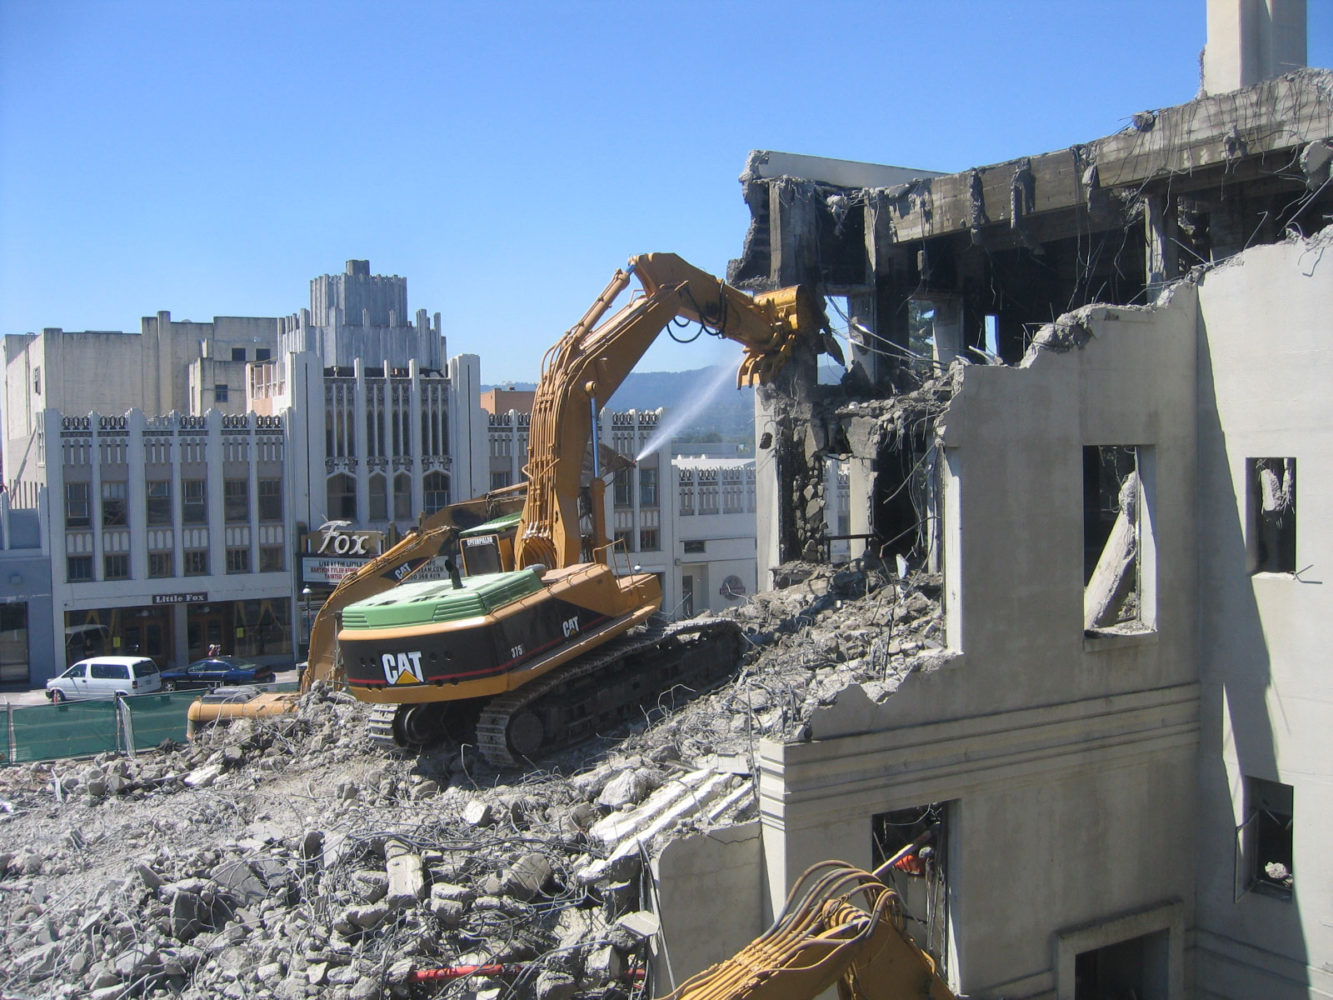 Demolition of Fiscal building in Redwood City